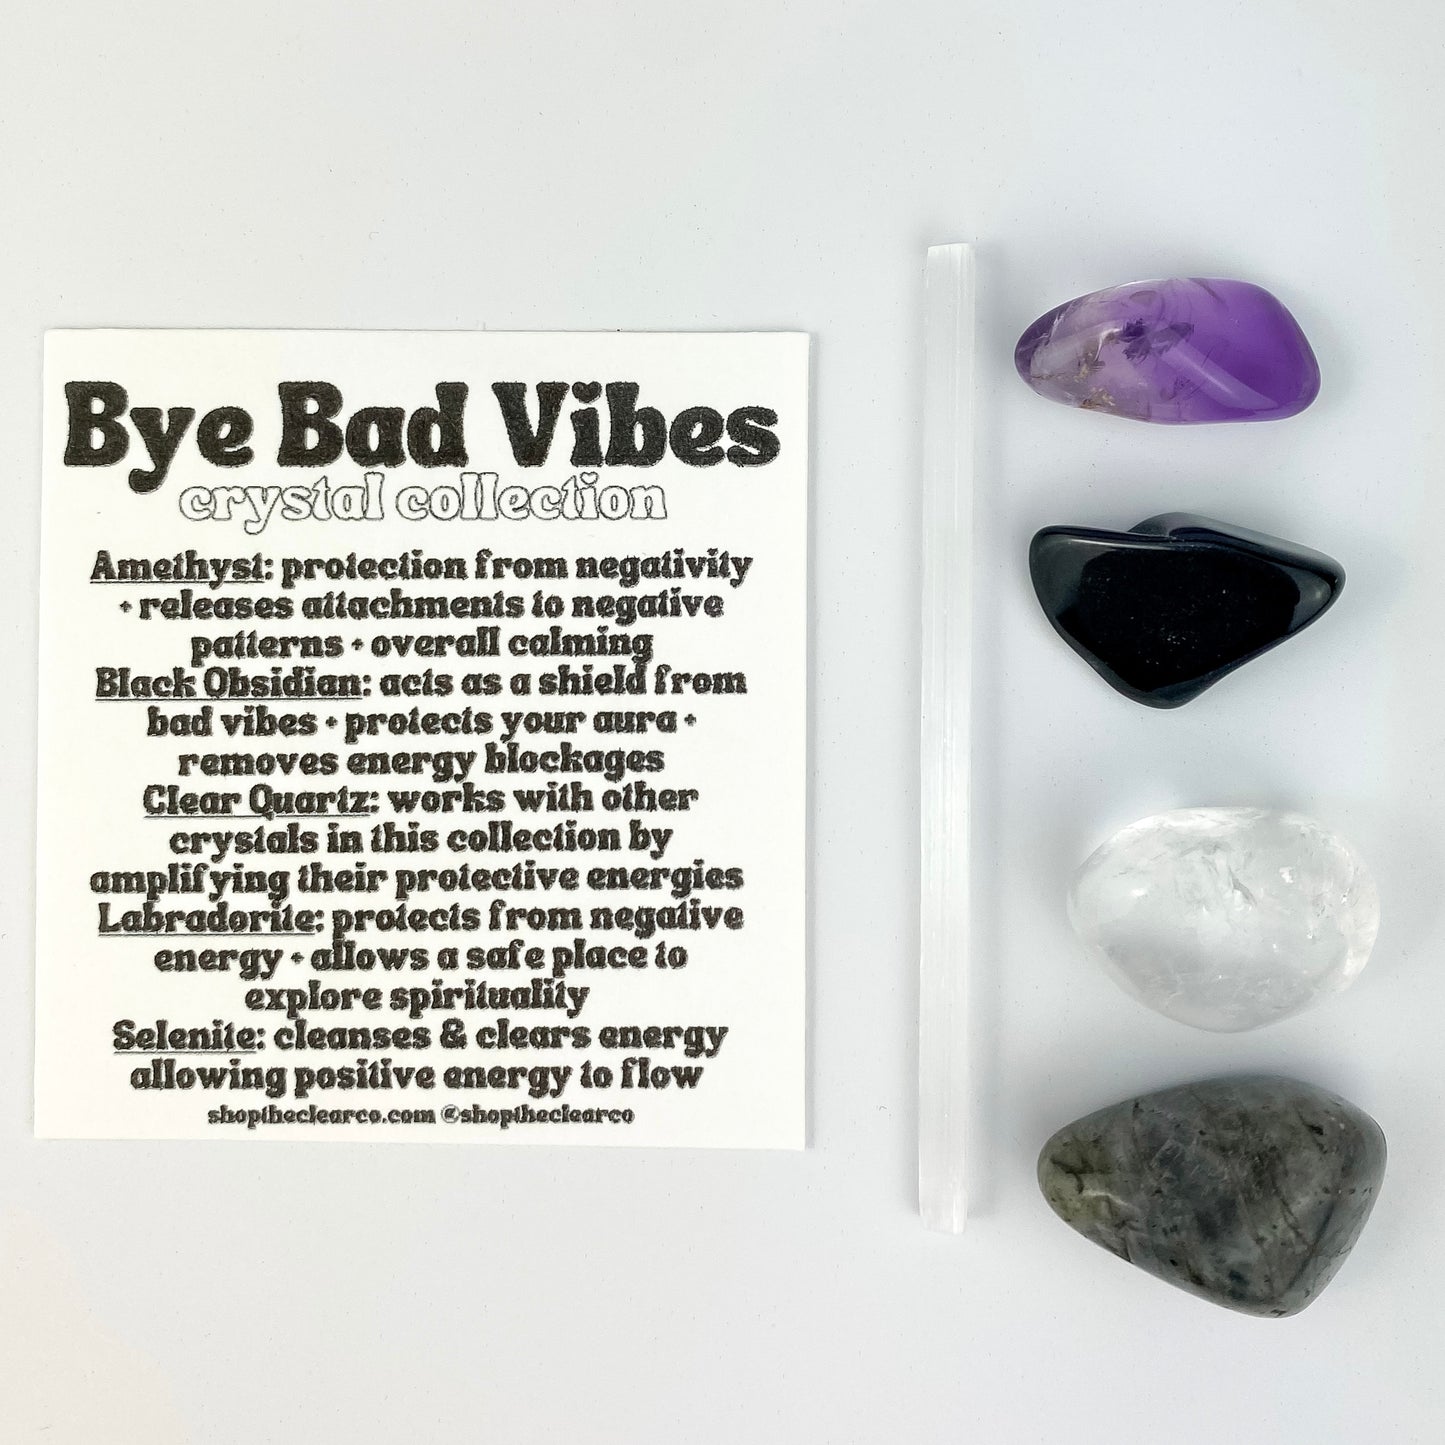 Bye Bad Vibes - Crystal Collection